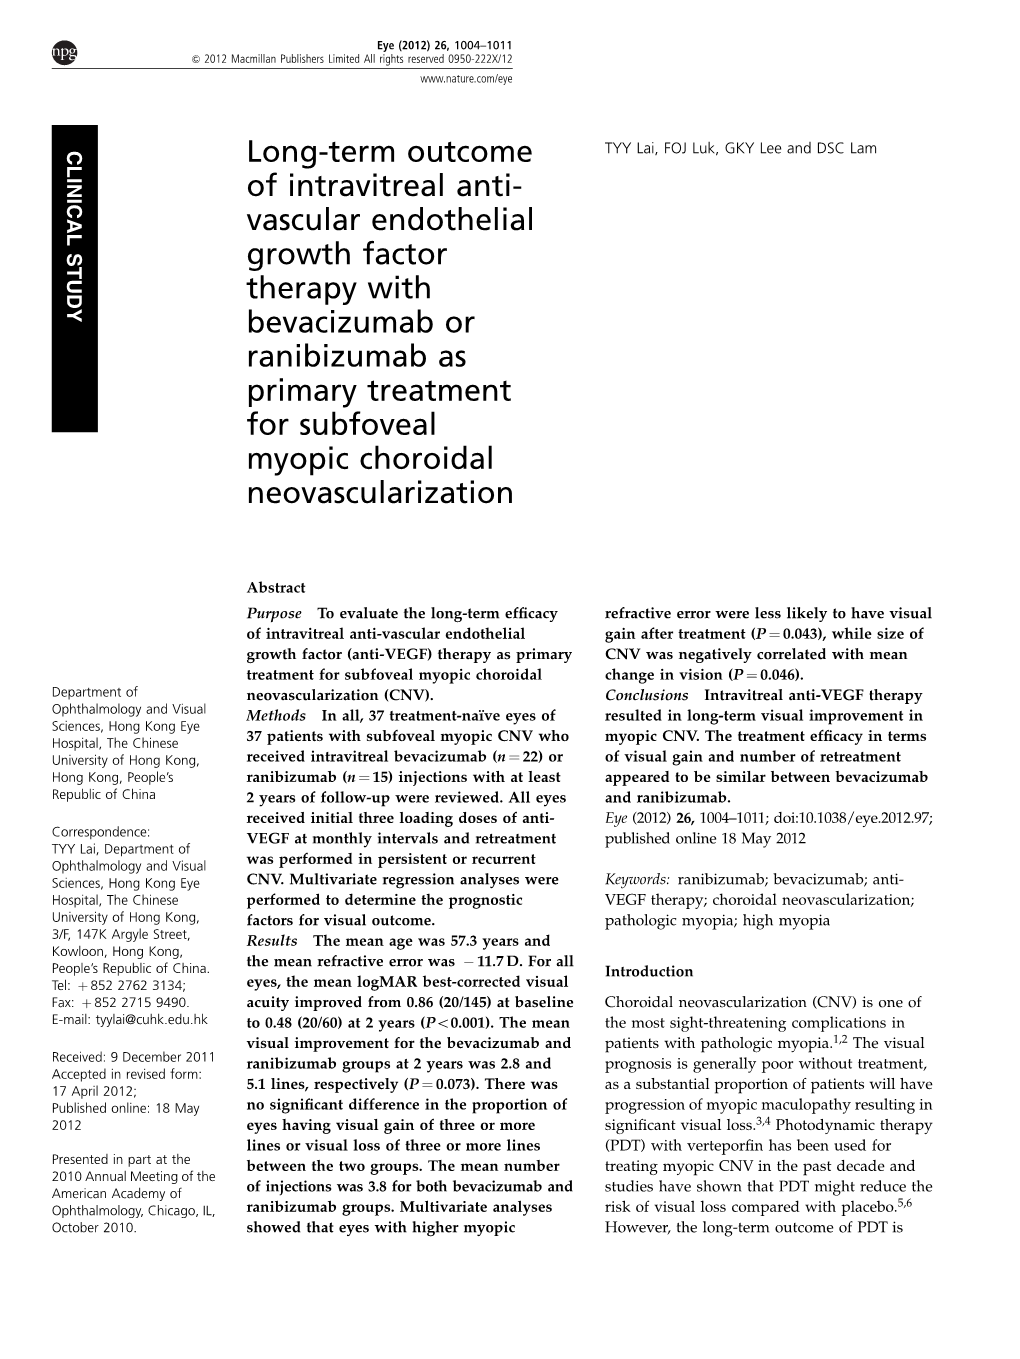 Long-Term Outcome of Intravitreal Anti-Vascular Endothelial Growth